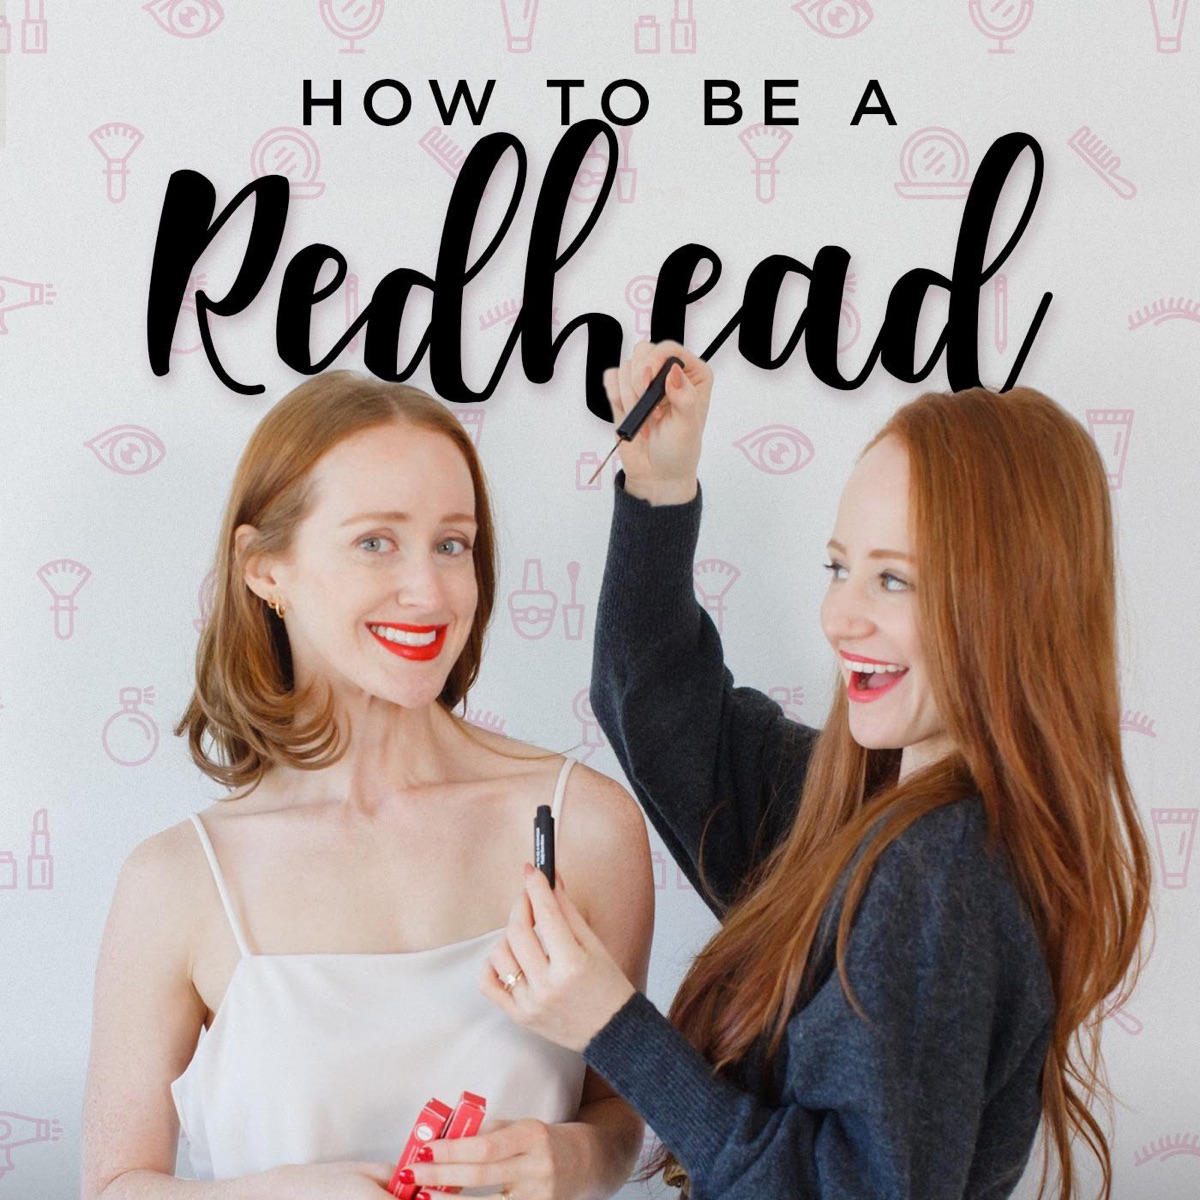 How to be a Redhead – Podcast – Podtail